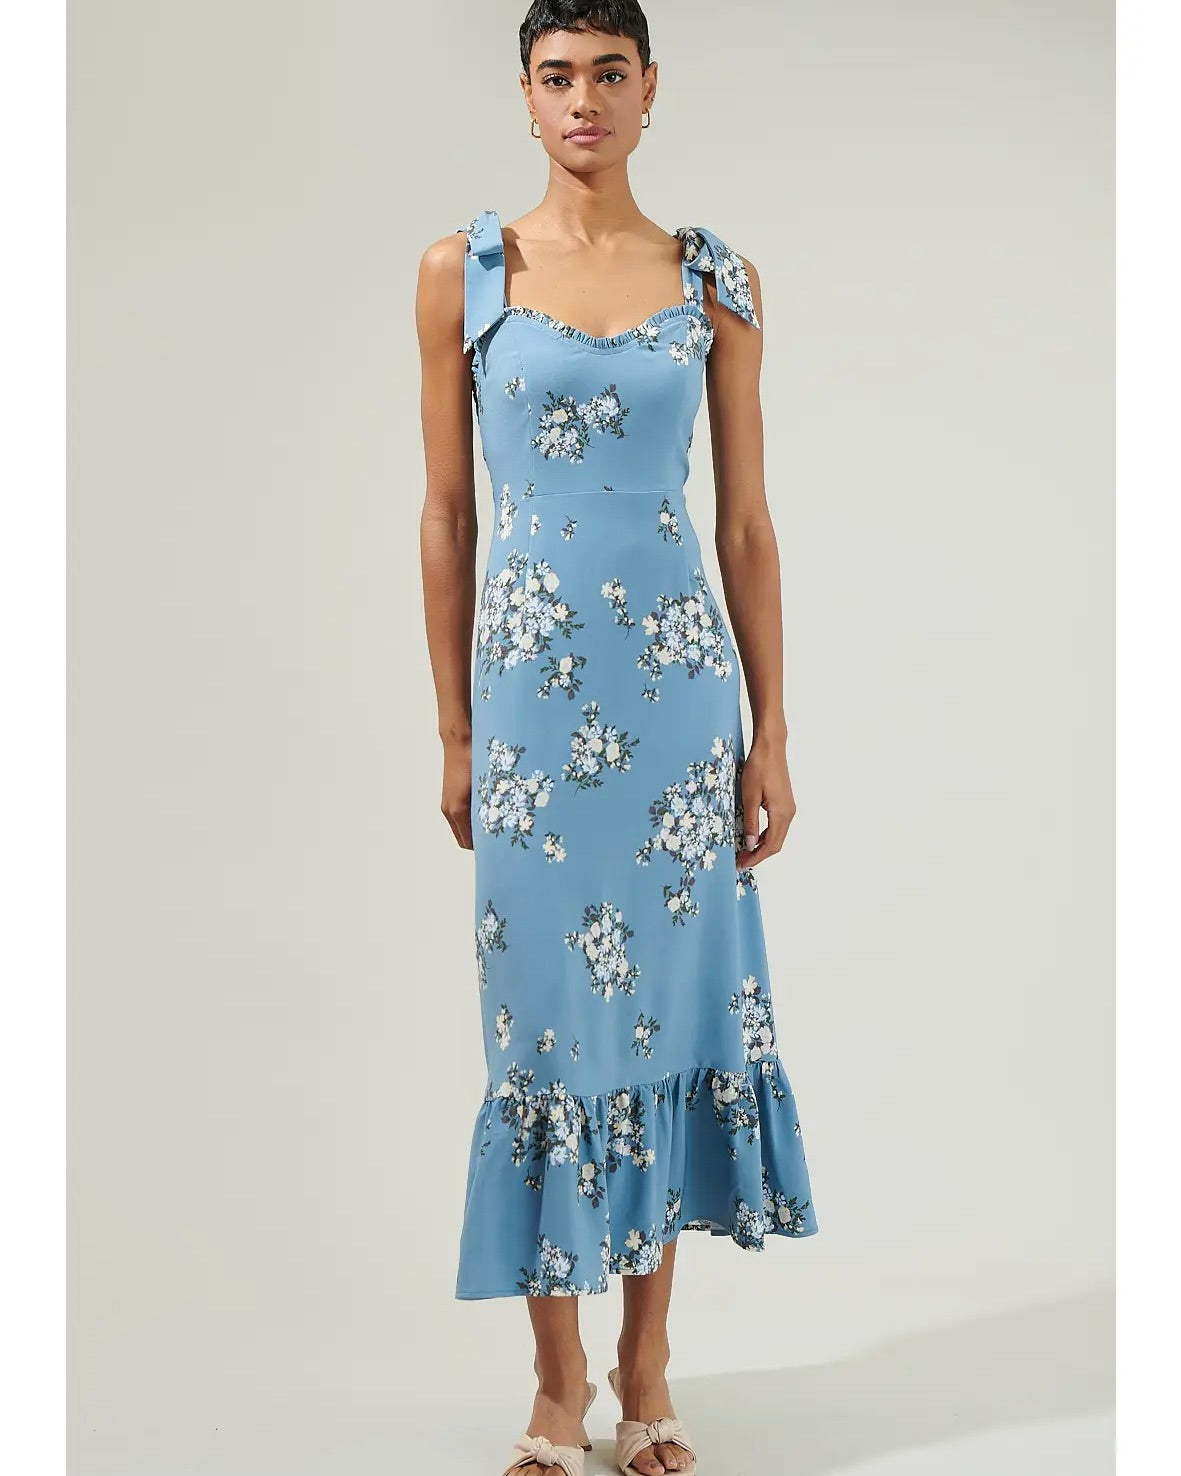 Model wearing Sugar Lips Floral Tie-Strap Slipdress on a gray background